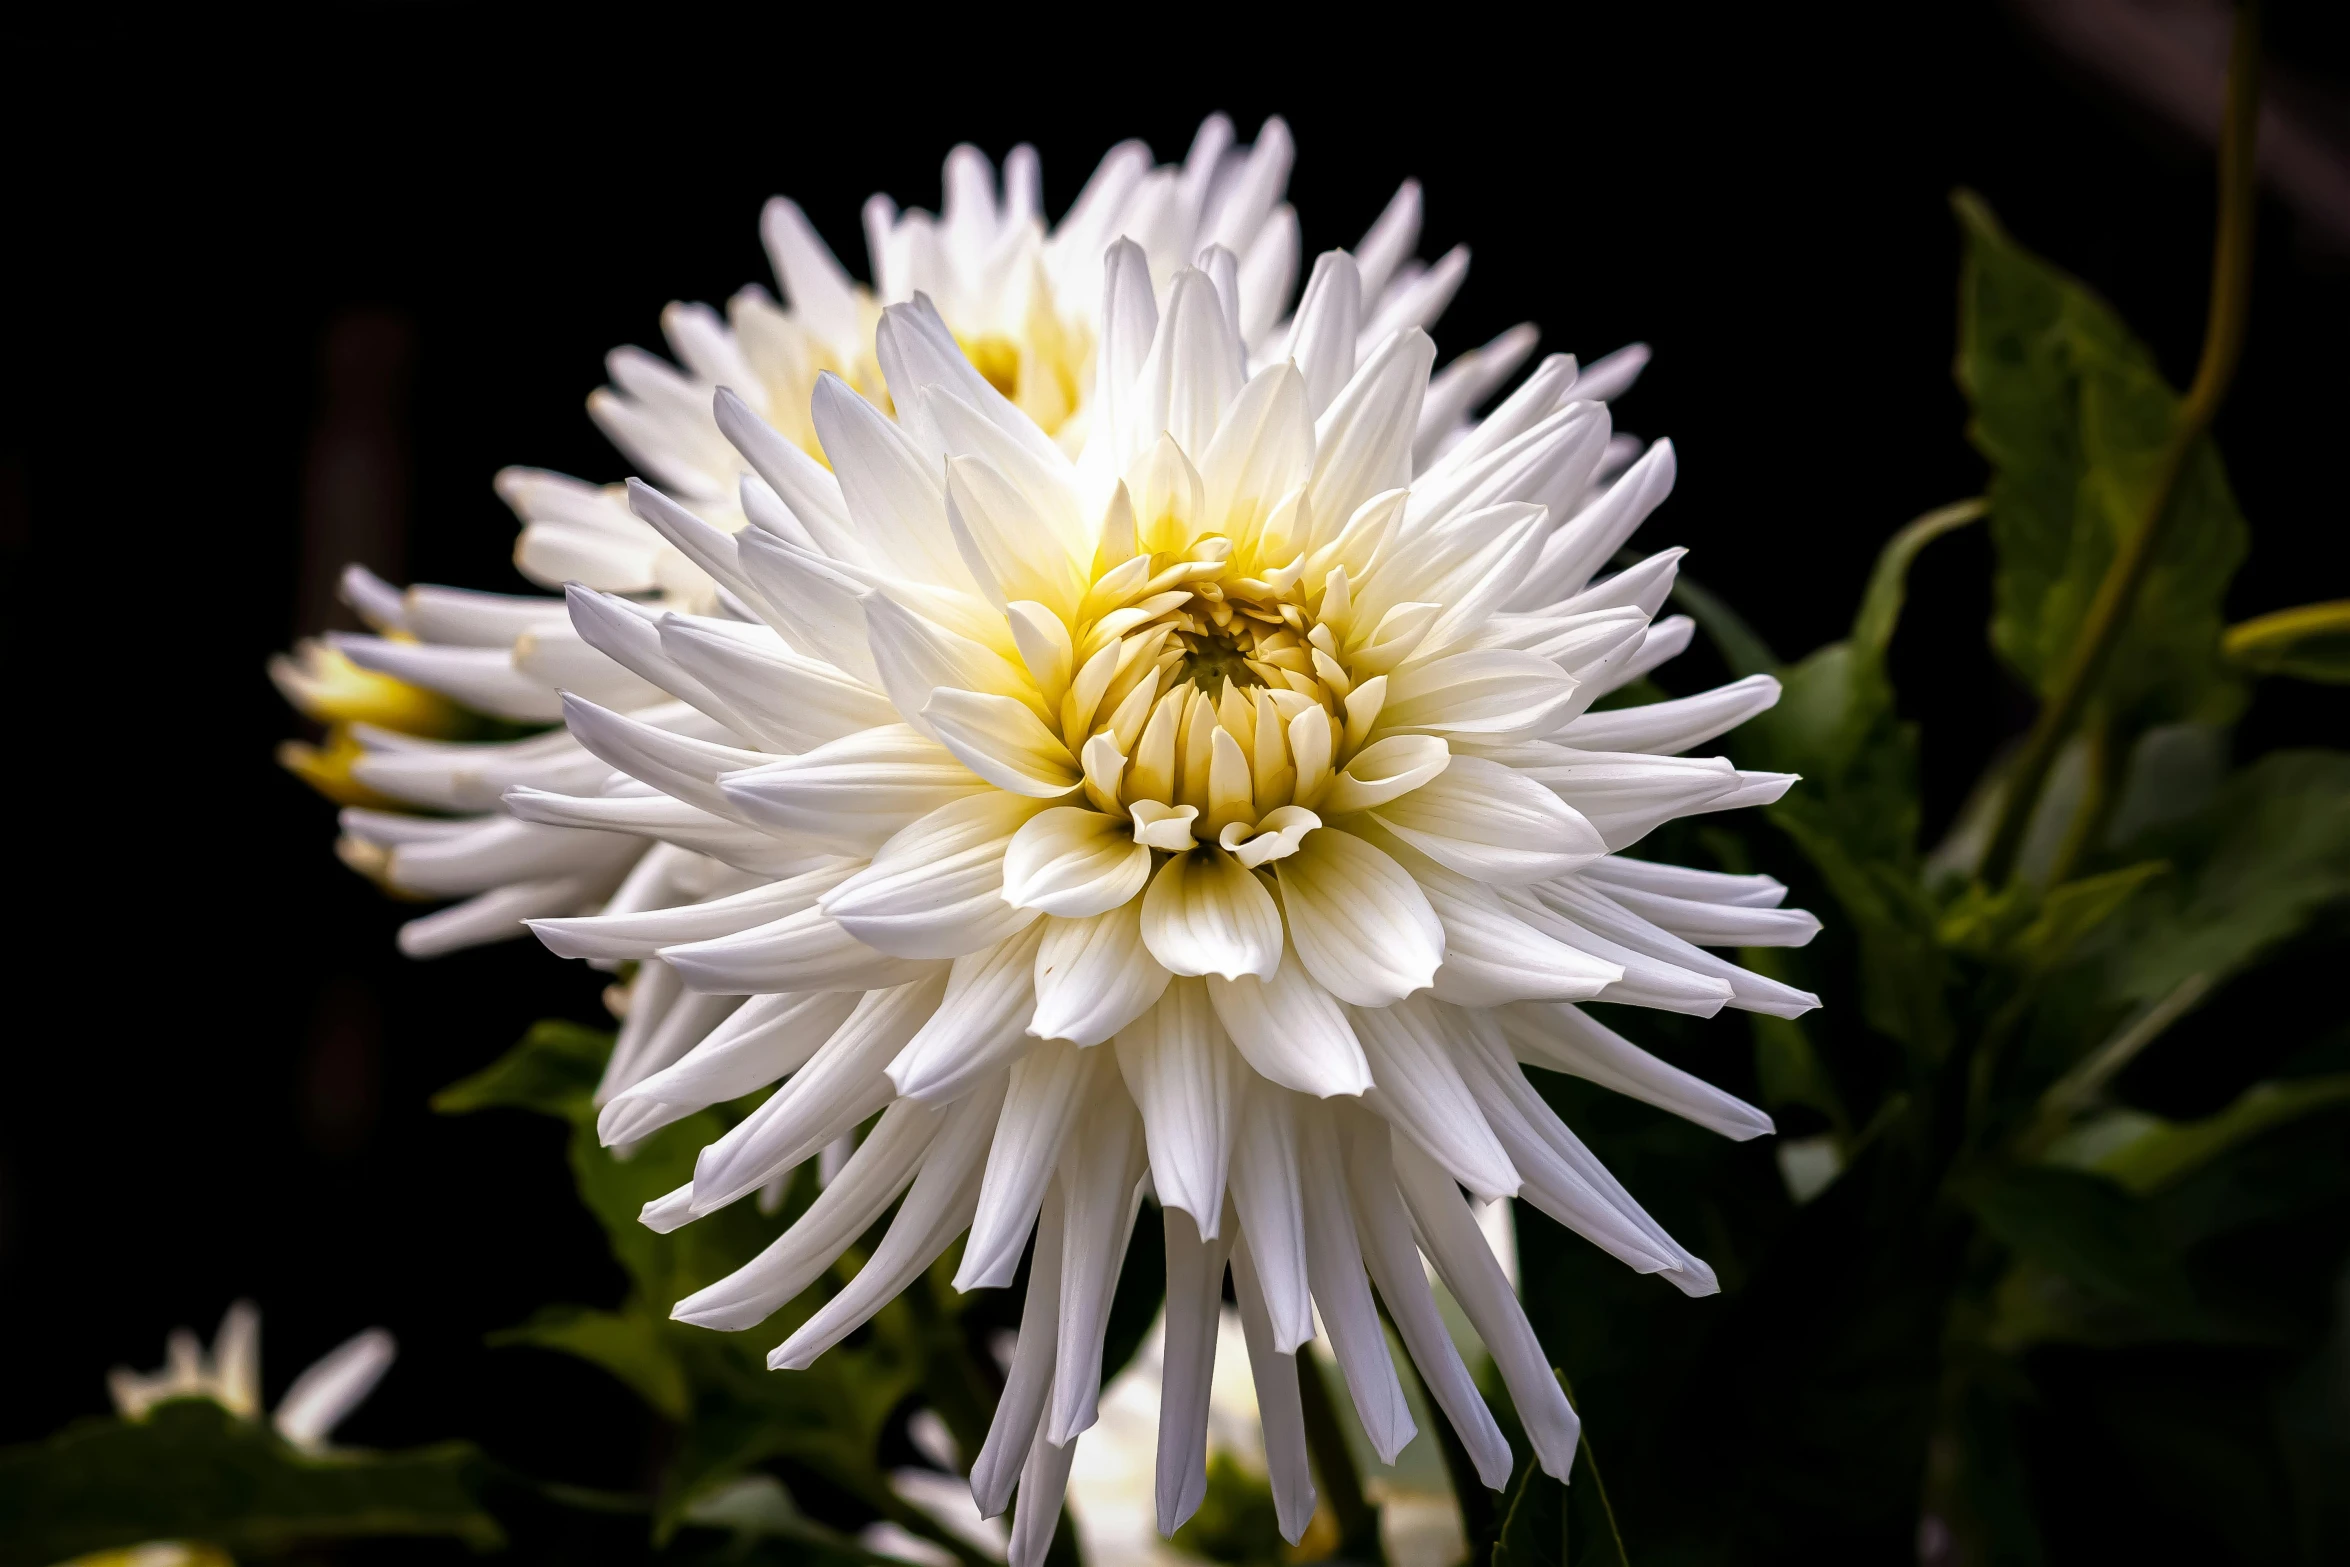 a close up of a white flower with green leaves, by Carey Morris, unsplash, baroque, chrysanthemum eos-1d, albino dwarf, shot with sony alpha, portrait mode photo